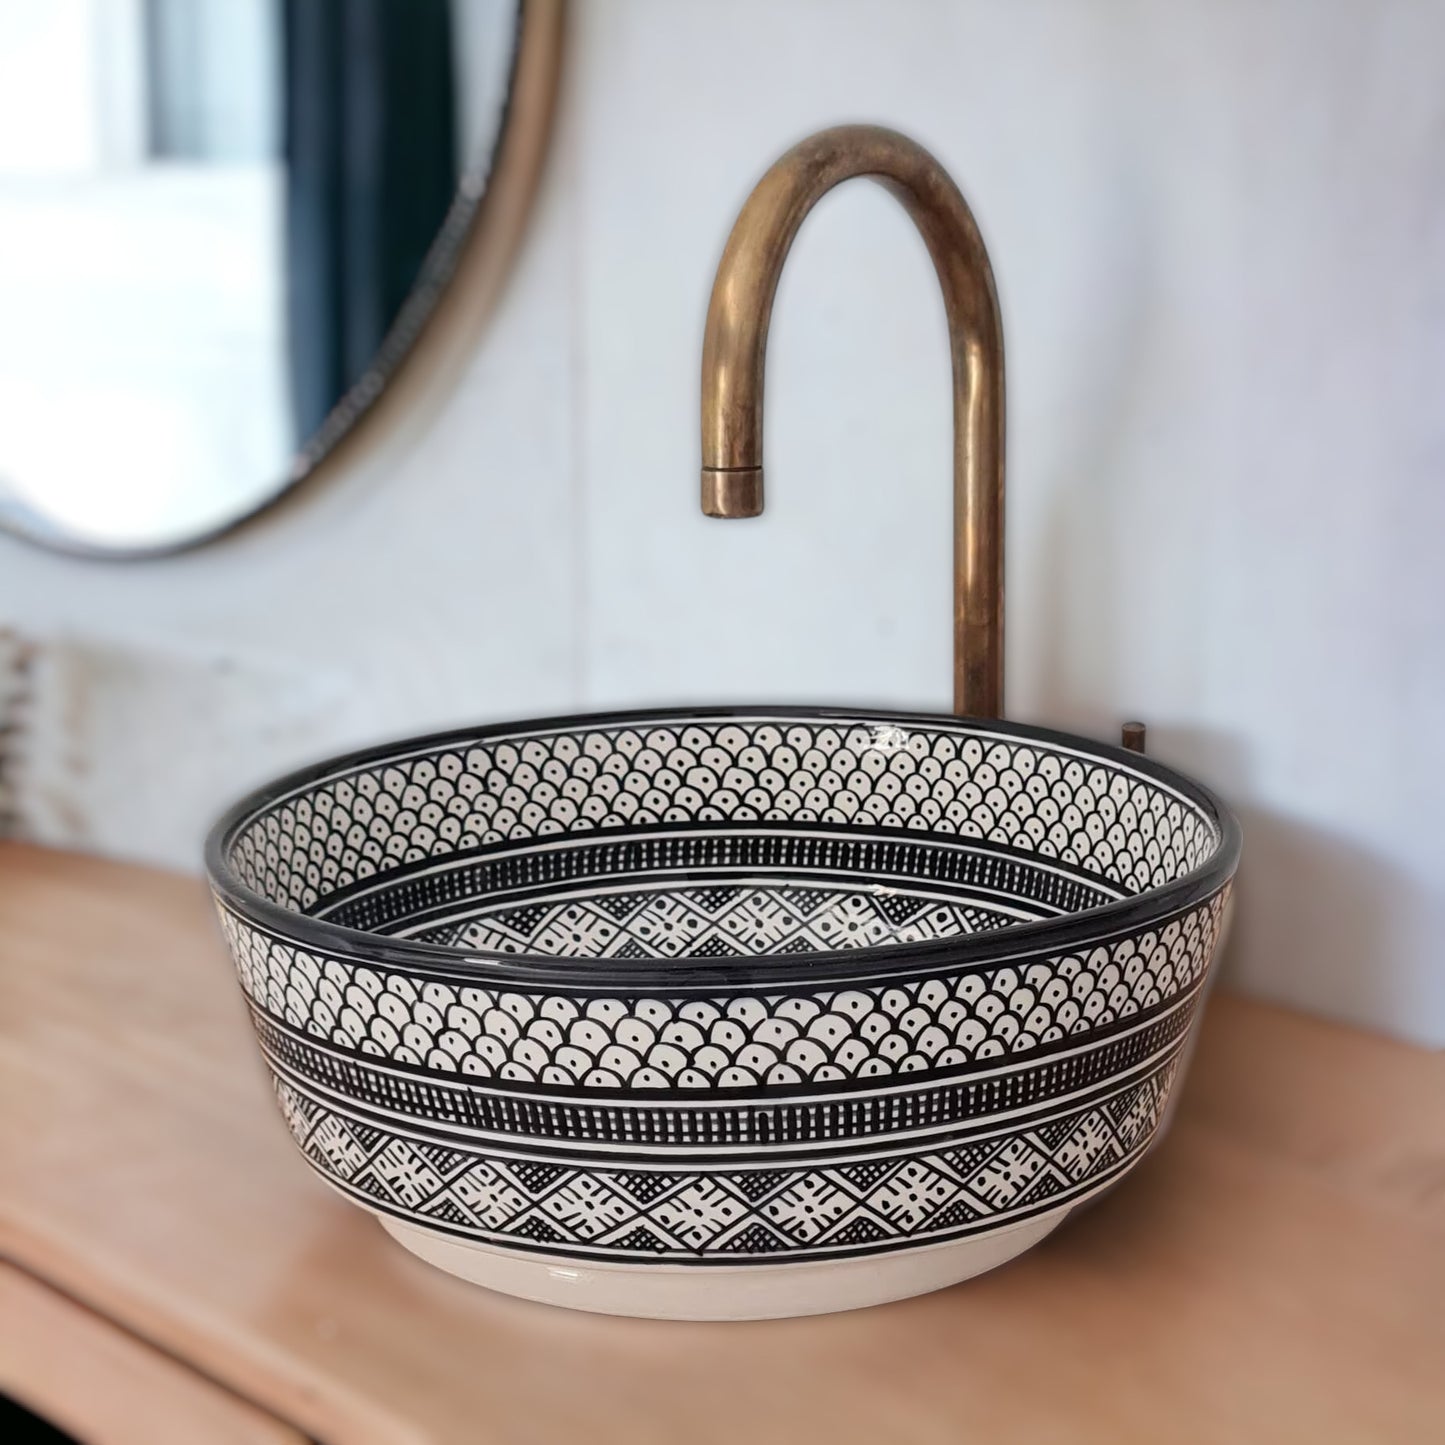 Moroccan sink | moroccan ceramic sink | bathroom sink | moroccan bathroom basin | cloakroom basin | Black and white sink #11